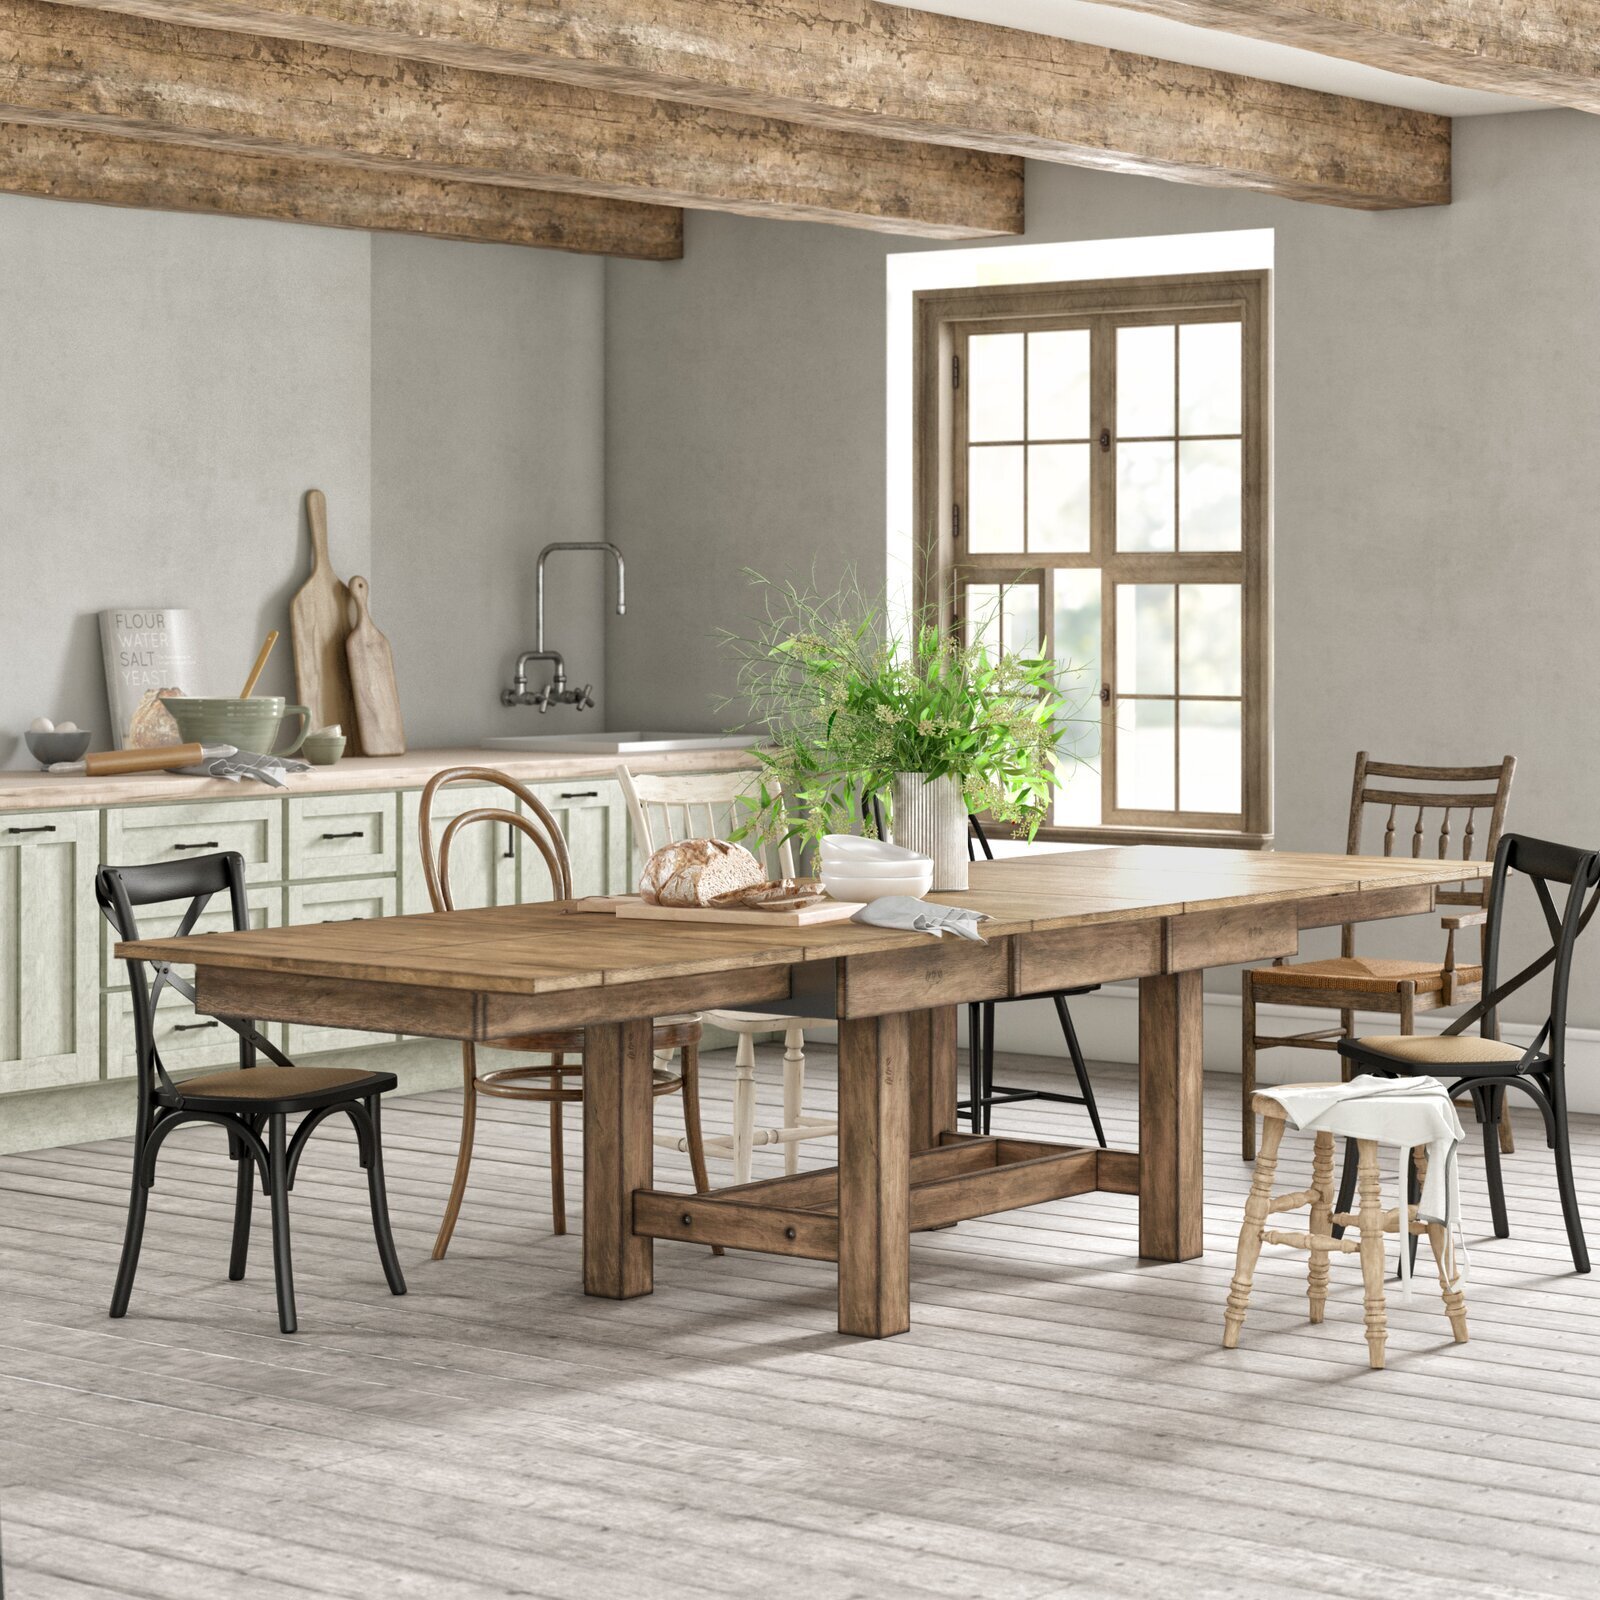 Rustic trestle dining room table with butterfly leaf